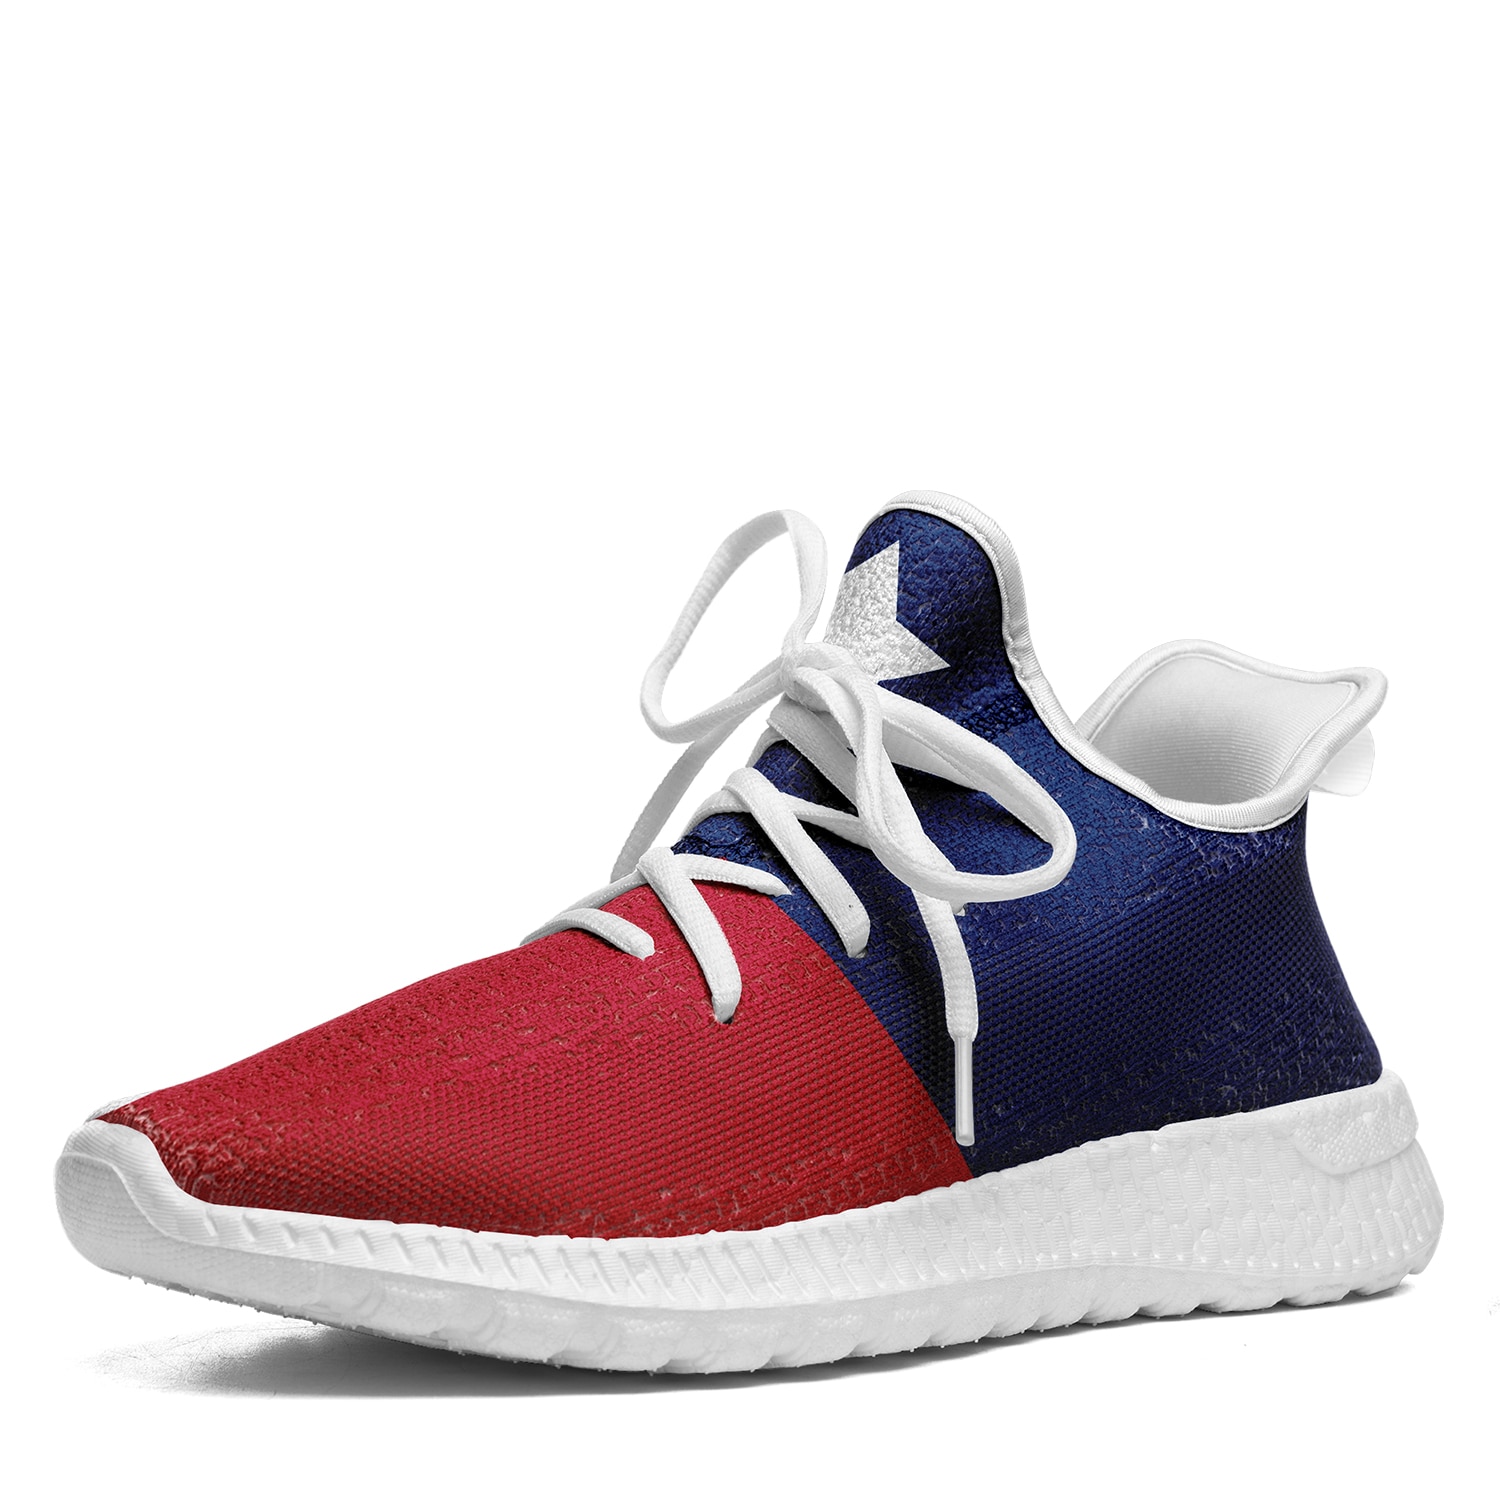 USA America Flag Shoes Patriotic Print On Demand Mens Sneakers Slip-on Lightweight Athletic Running Walking Shoes Drop shipping